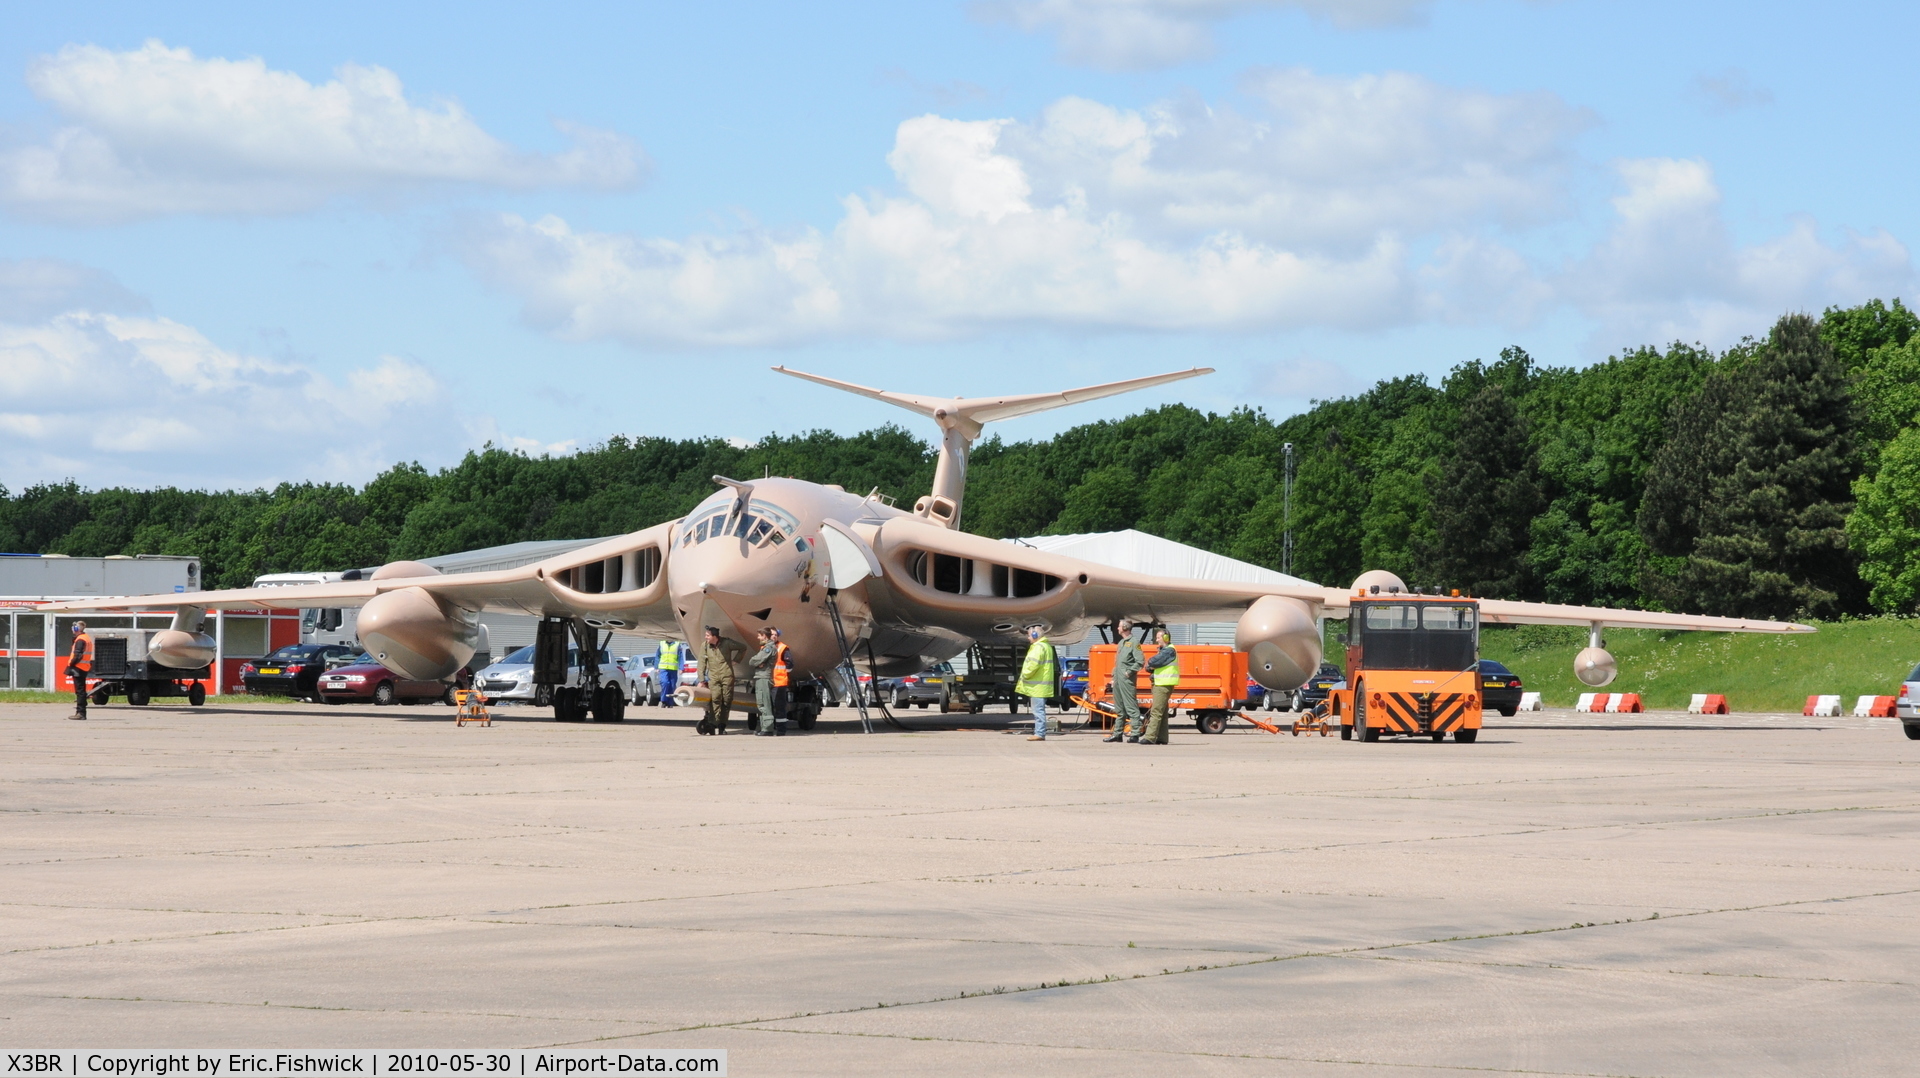 X3BR Airport - Handley Page Victor K.2 at Bruntingthorpe Cold War Jets Open Day - May 2010